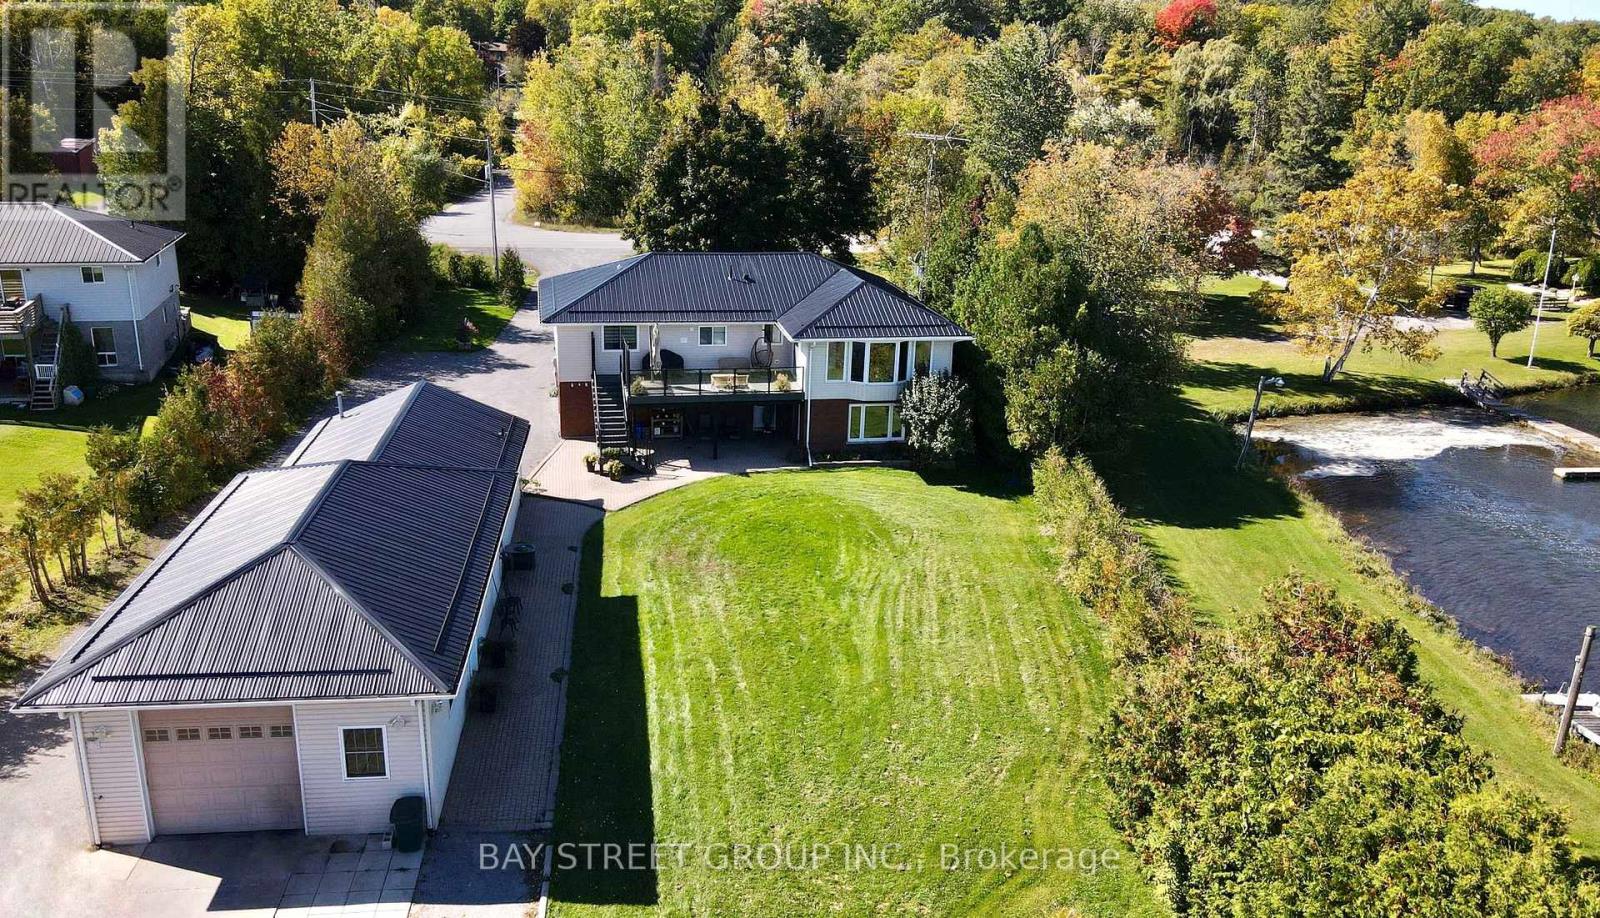 5173 RICE LAKE DR N located in Hamilton Township, Ontario